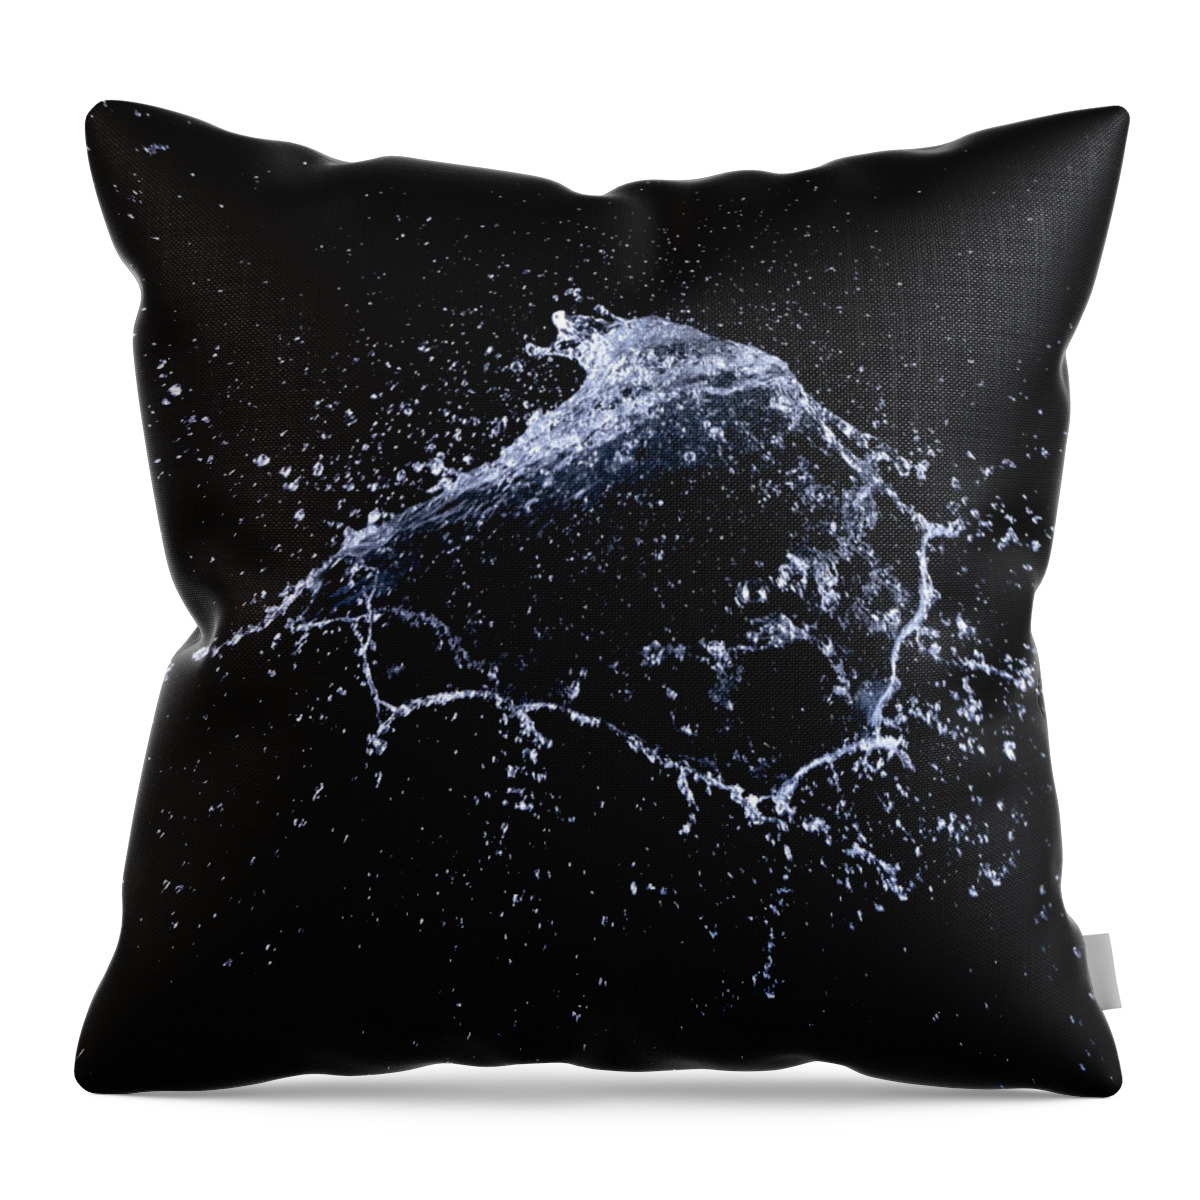 Spray Throw Pillow featuring the photograph Water Explosion #2 by Vasko